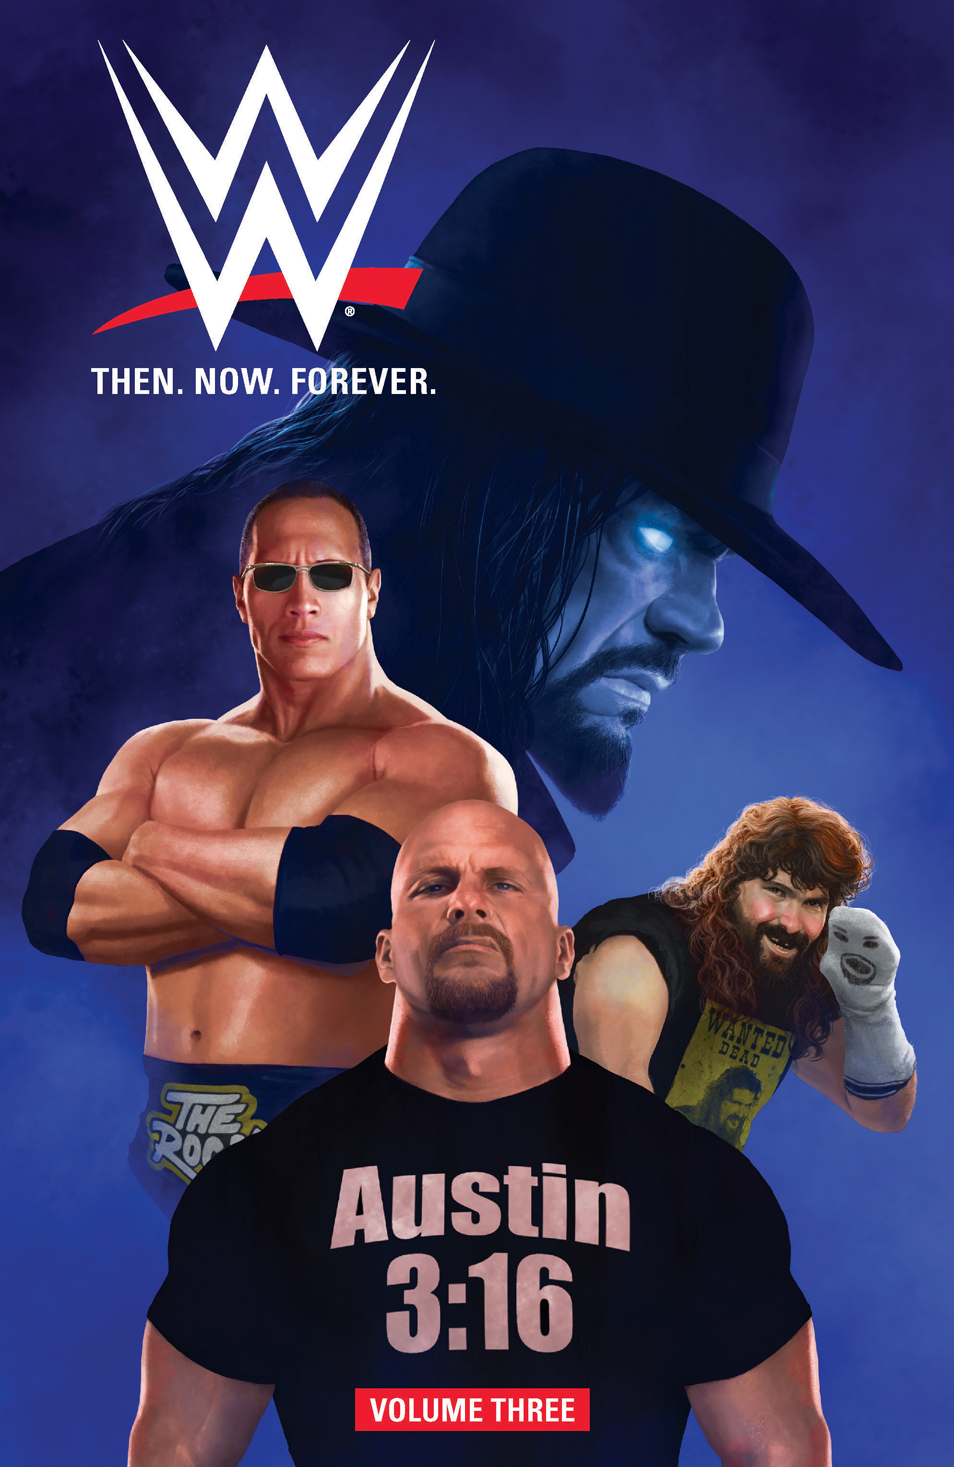 This image is the cover for the book WWE: Then. Now. Forever. Vol. 3, WWE